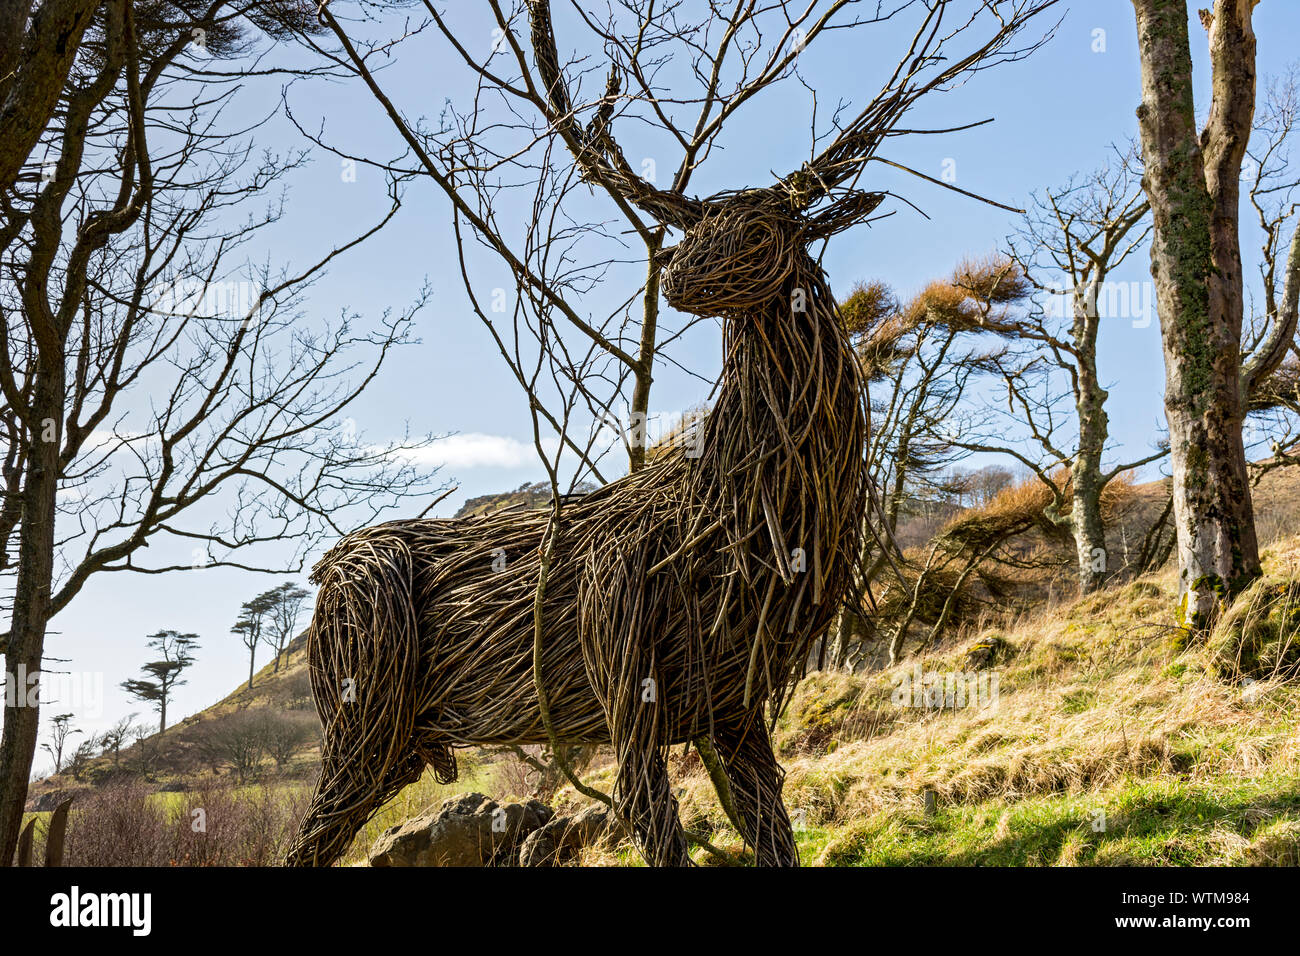 Willow Stag, a sculpture by Trevor Leat, at the Calgary Sculpture Walk, Calgary Bay, Isle of Mull, Scotland, UK Stock Photo